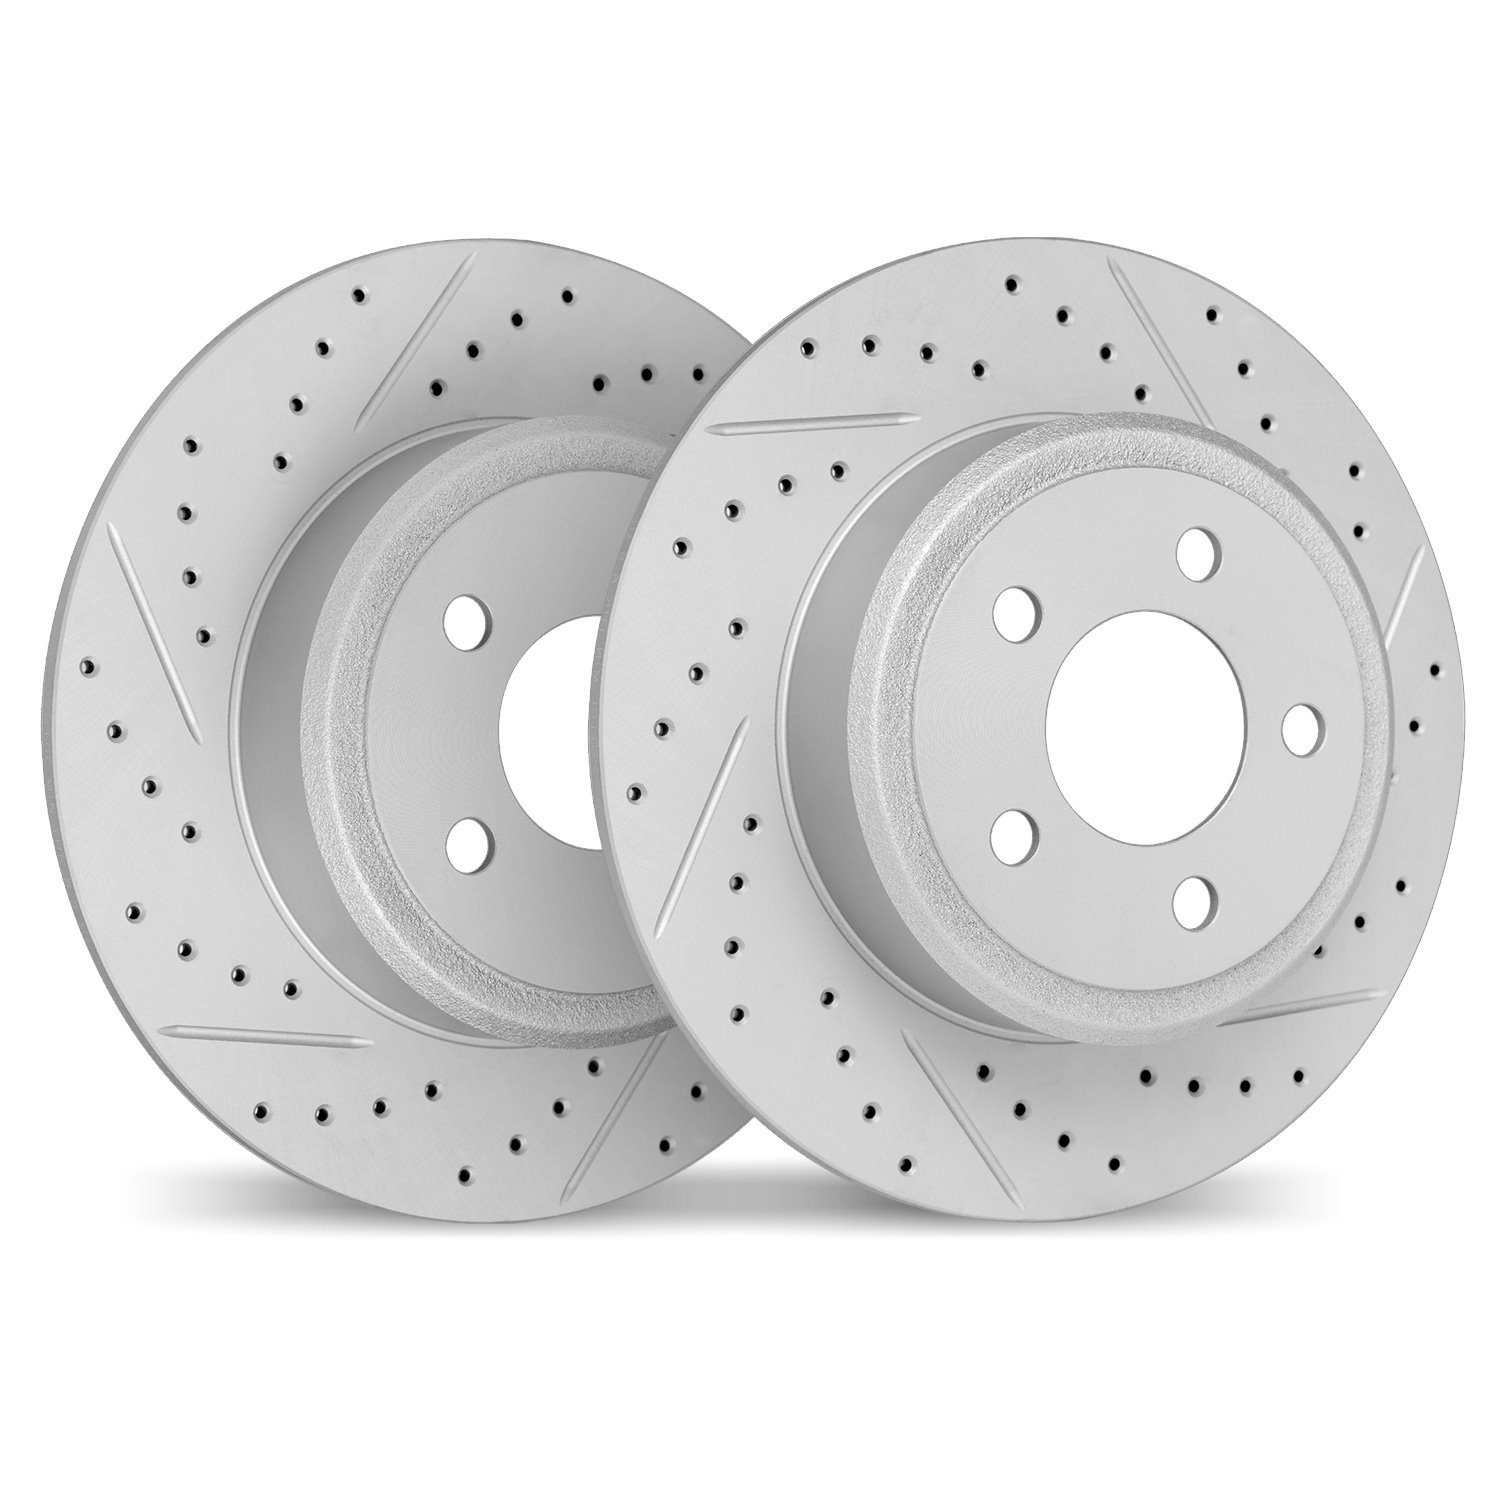 2002-67060 Geoperformance Drilled/Slotted Brake Rotors, Fits Select Infiniti/Nissan, Position: Rear